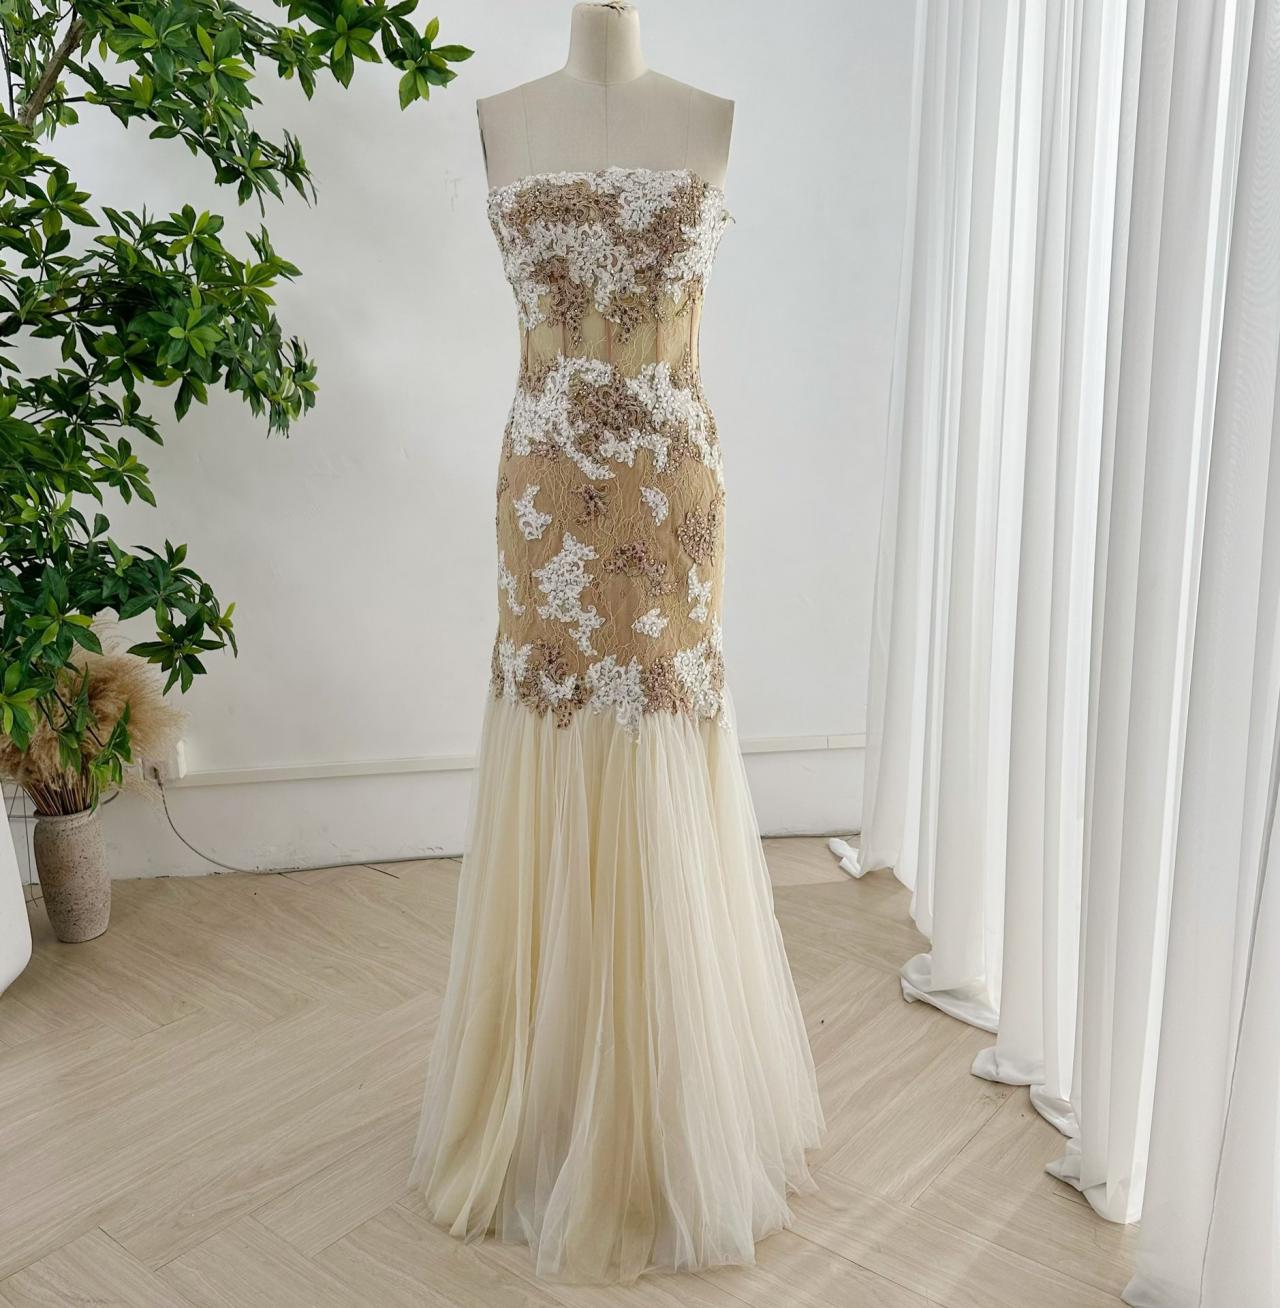 Strapless Sheath Gold Prom Dress With Beaded Appliques